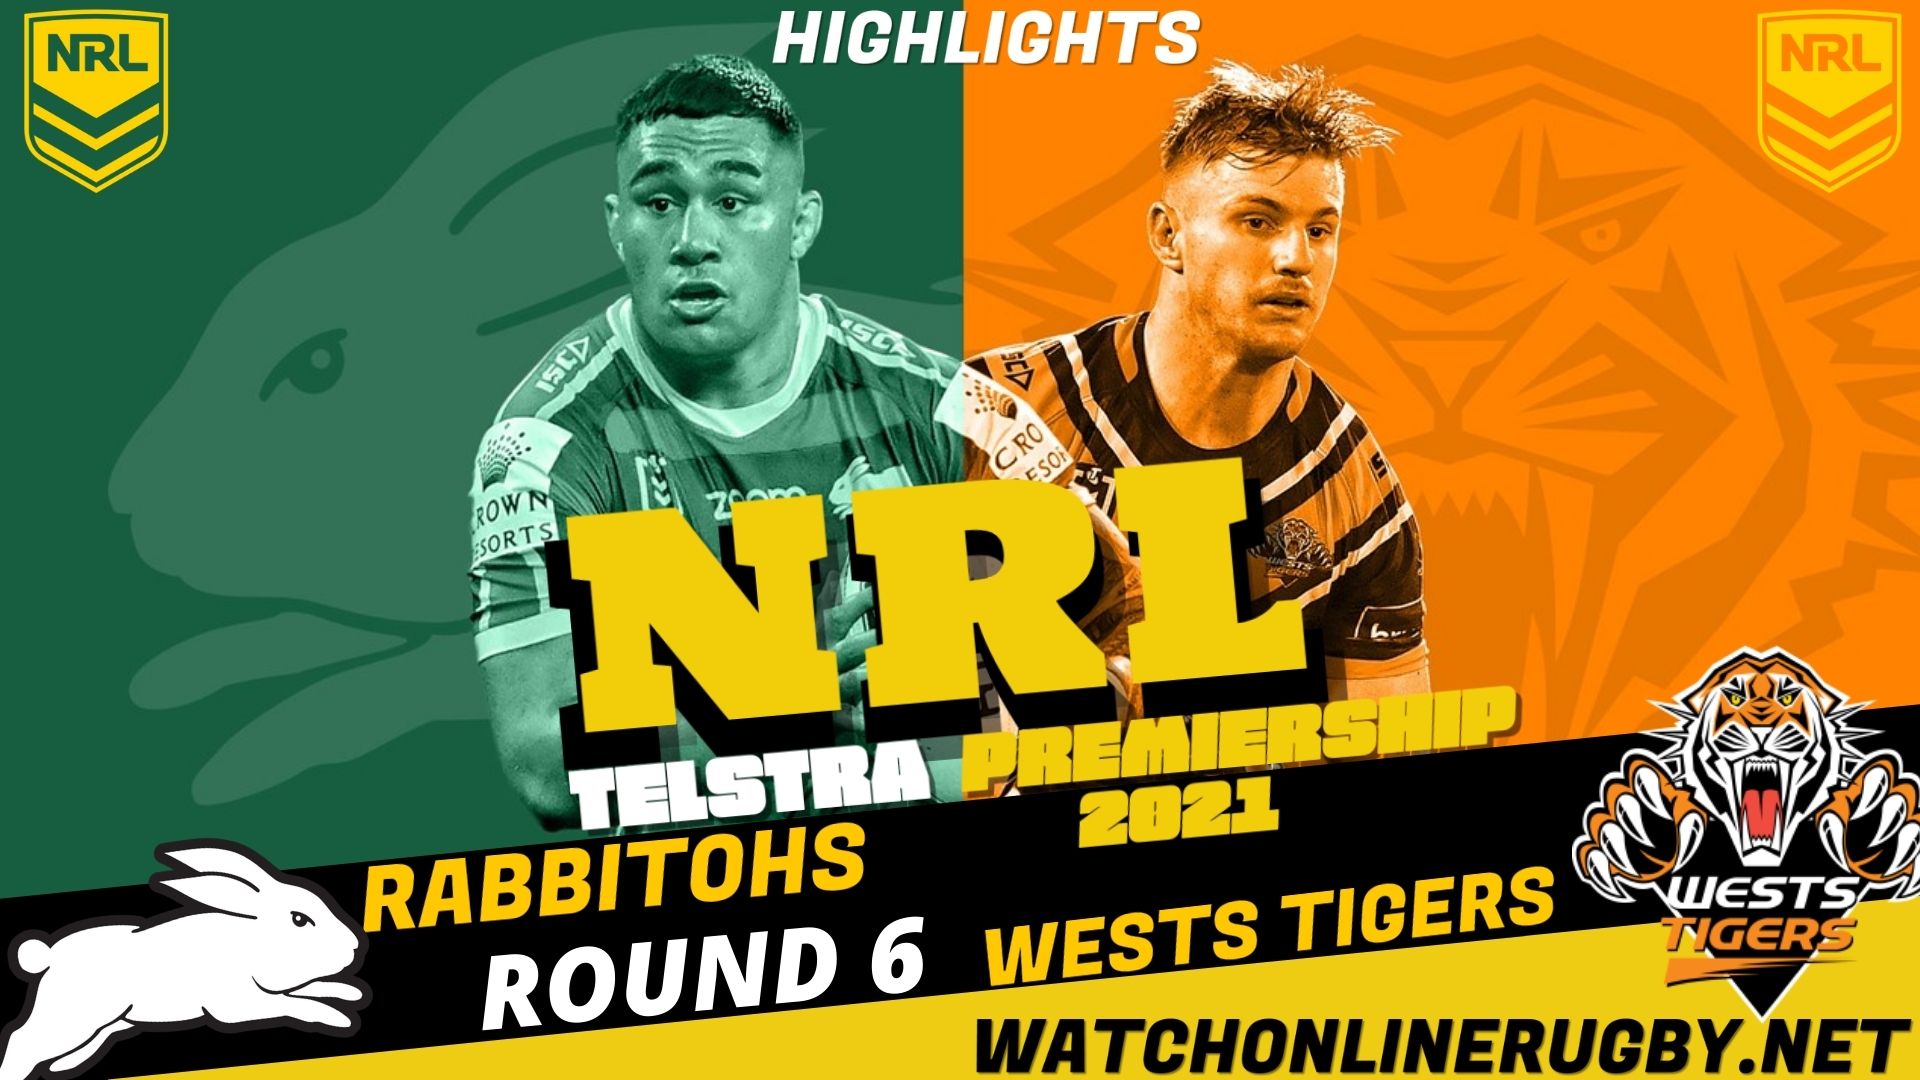 Rabbitohs Vs Wests Tigers Highlights RD 6 NRL Rugby